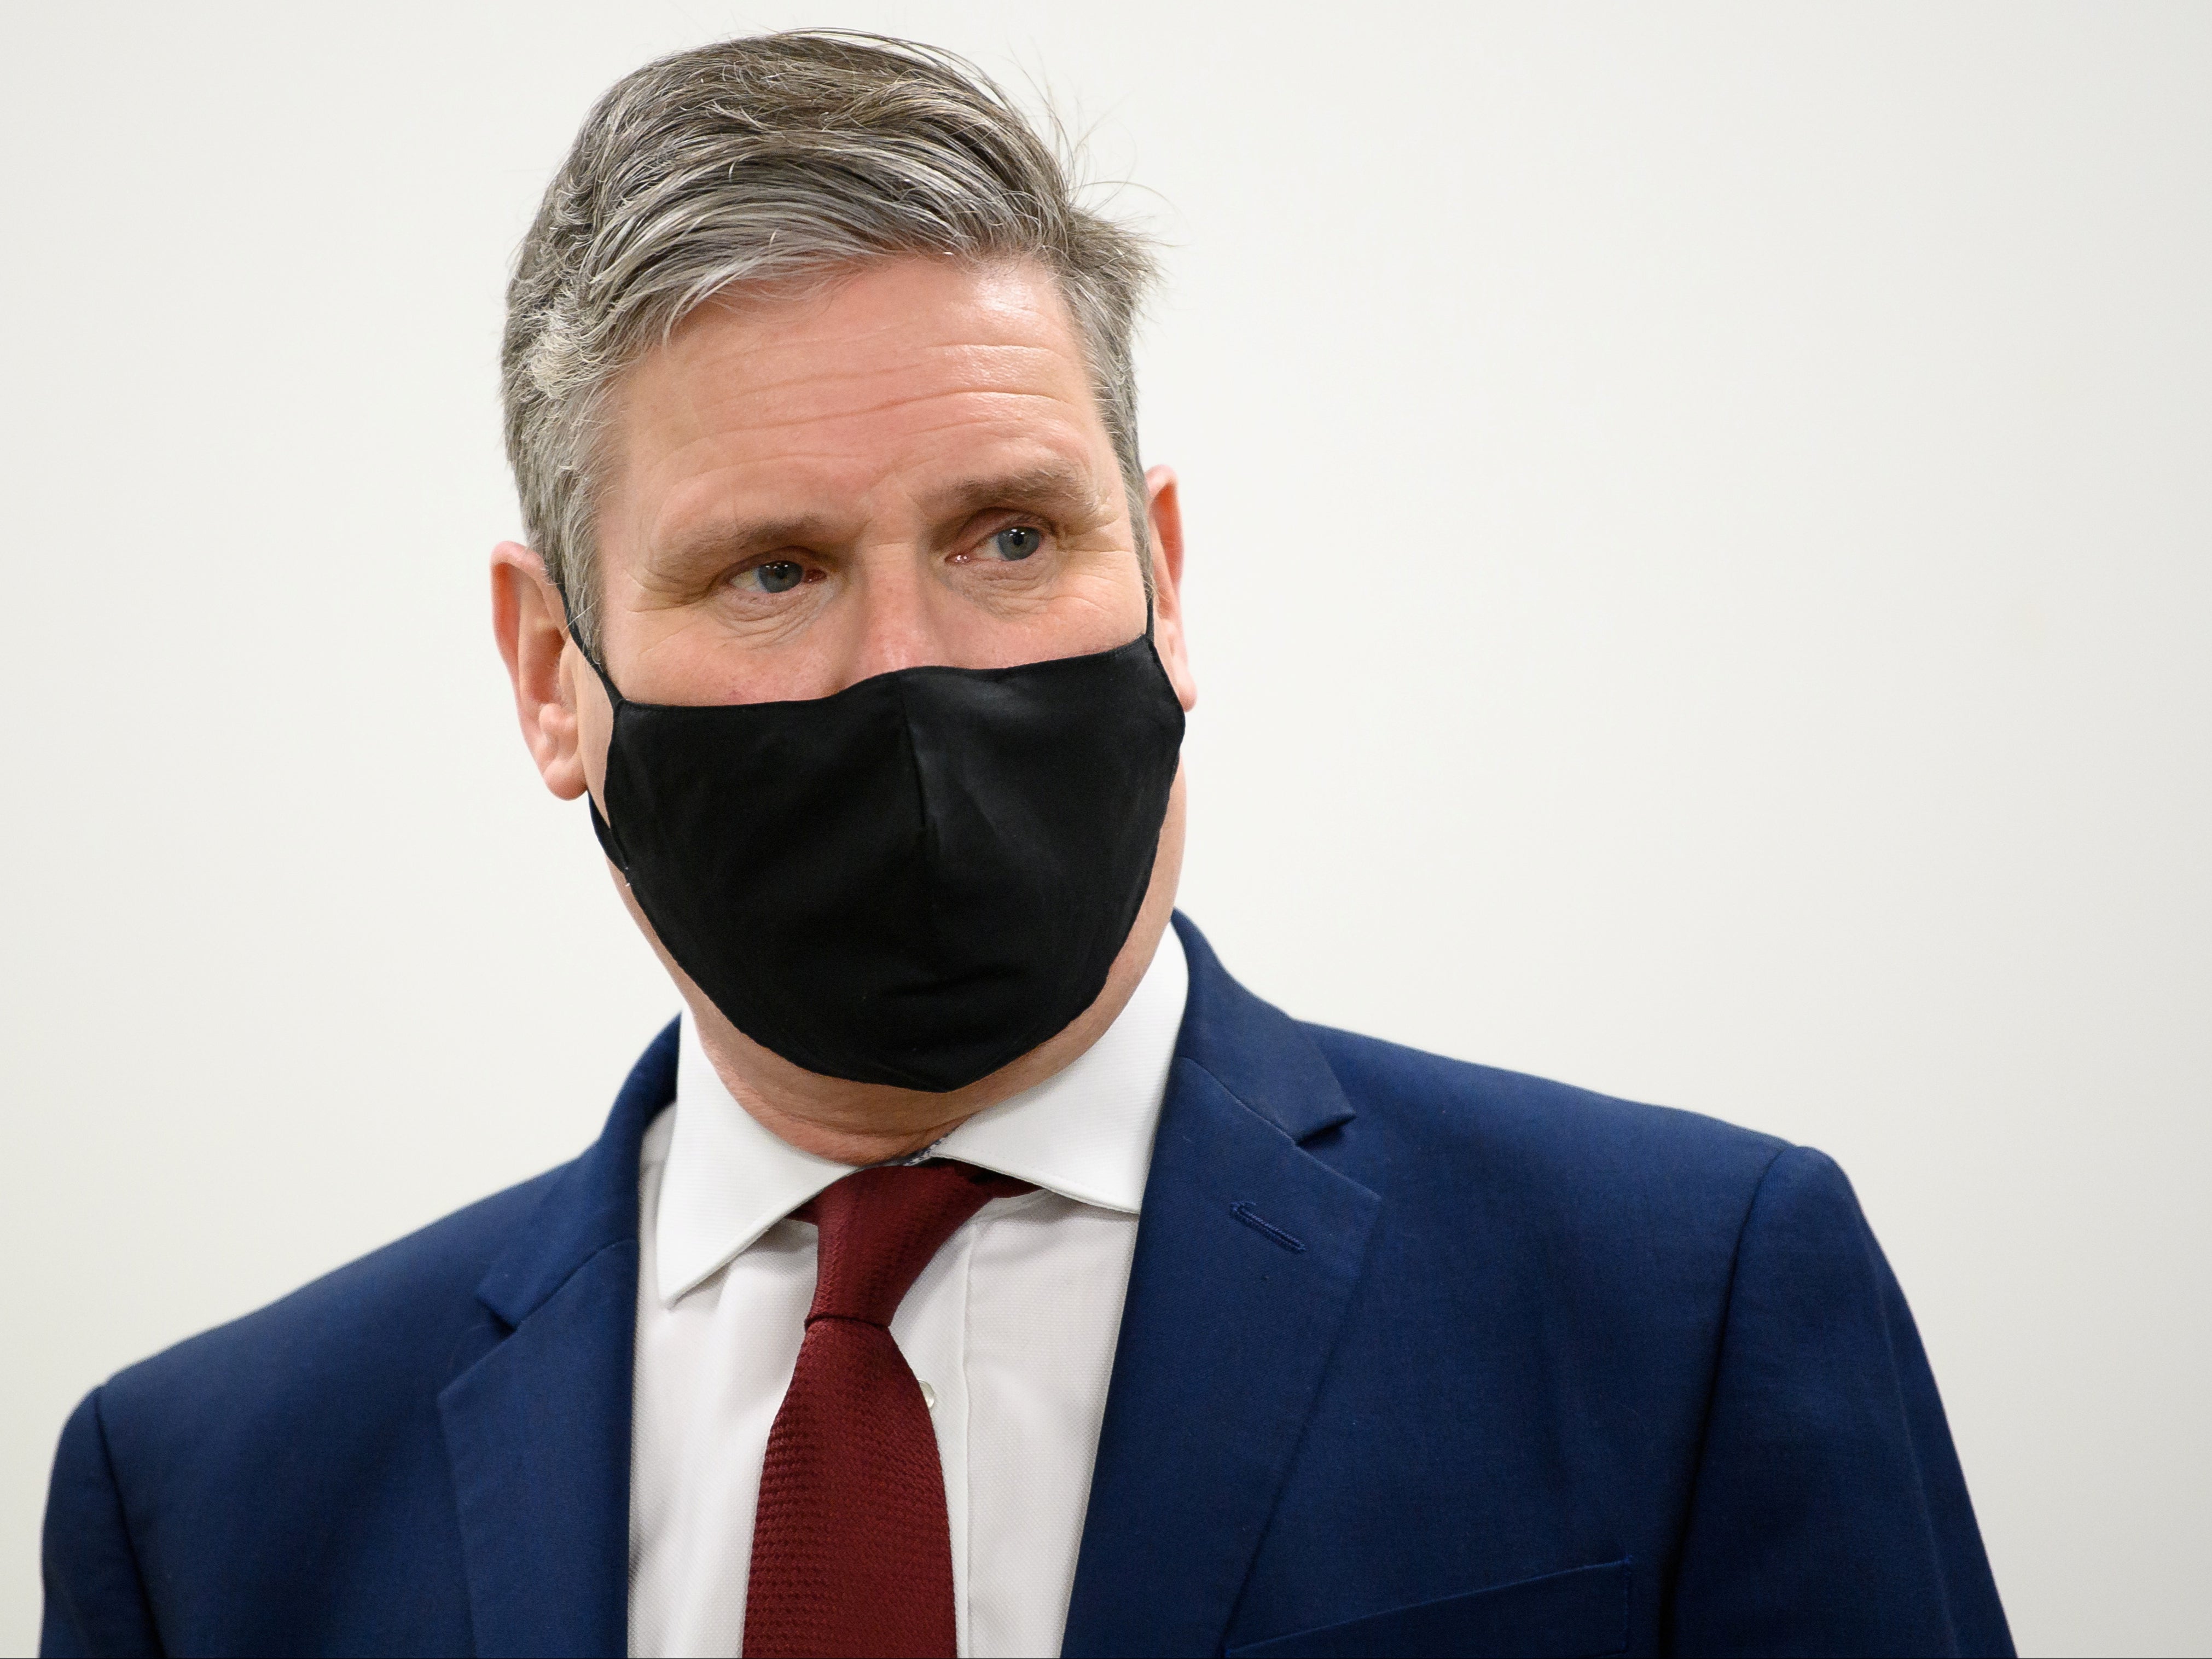 Keir Starmer is set to lay out his economic vision for the country